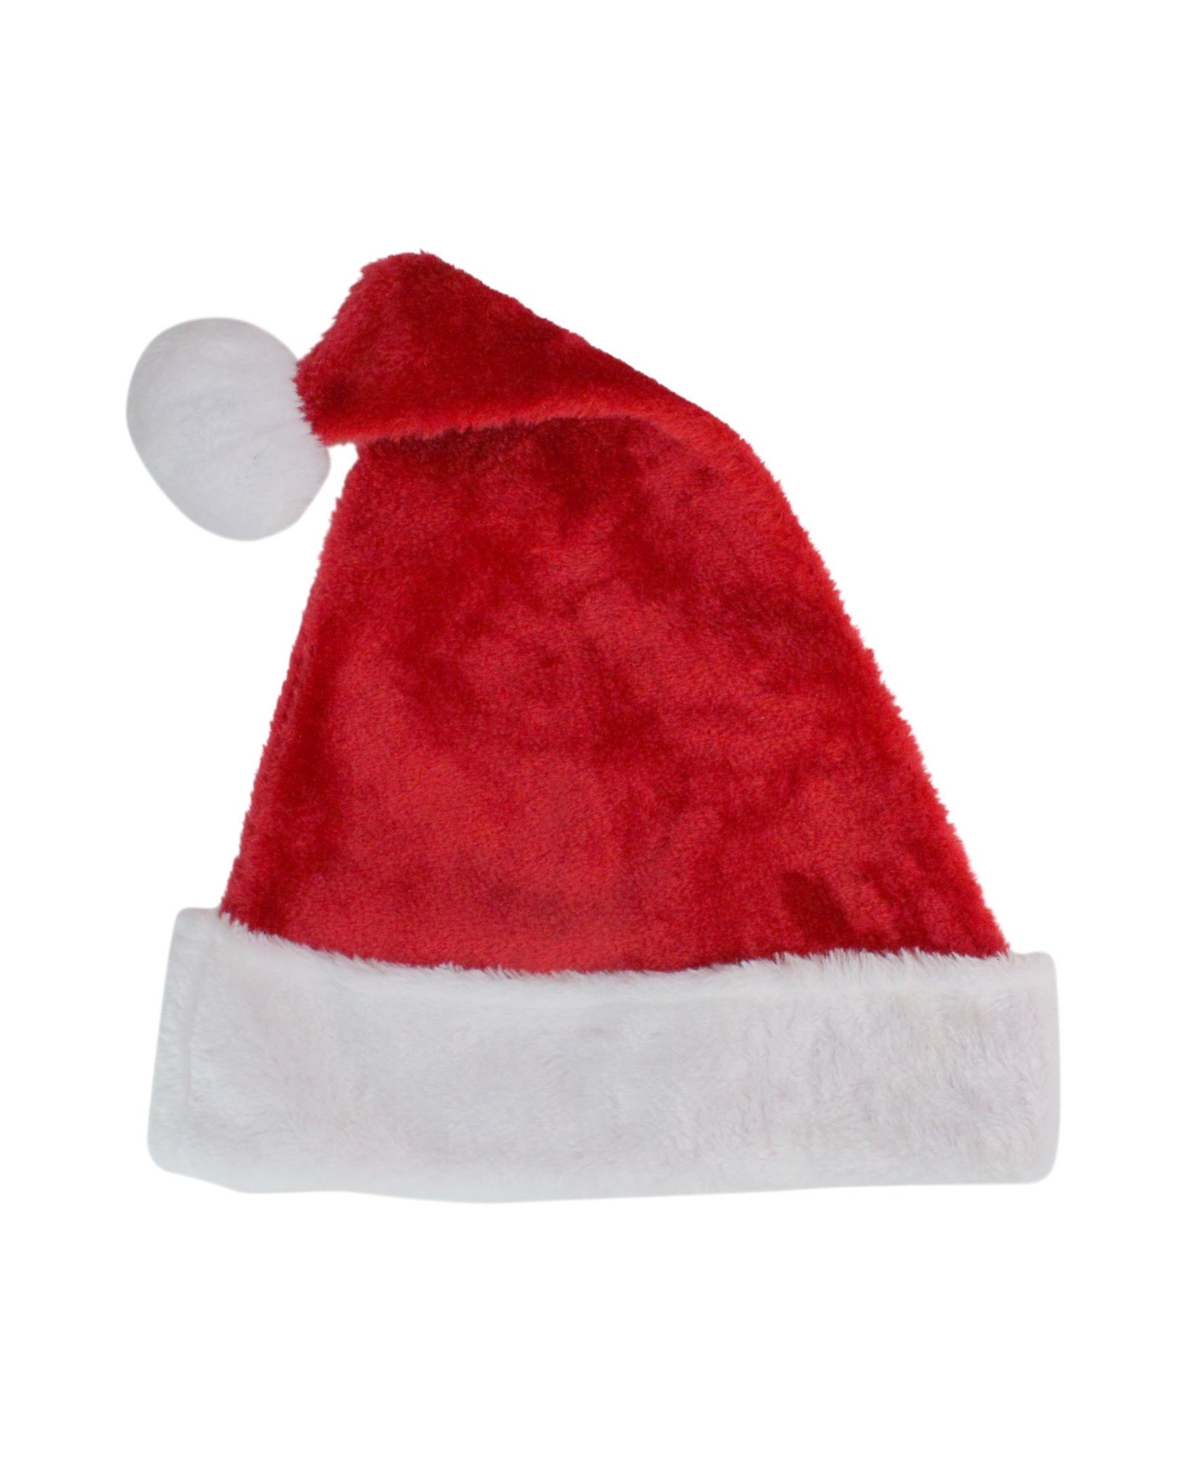 17" Traditional Red and White Plush Christmas Santa Hat - Adult Size Large - Red